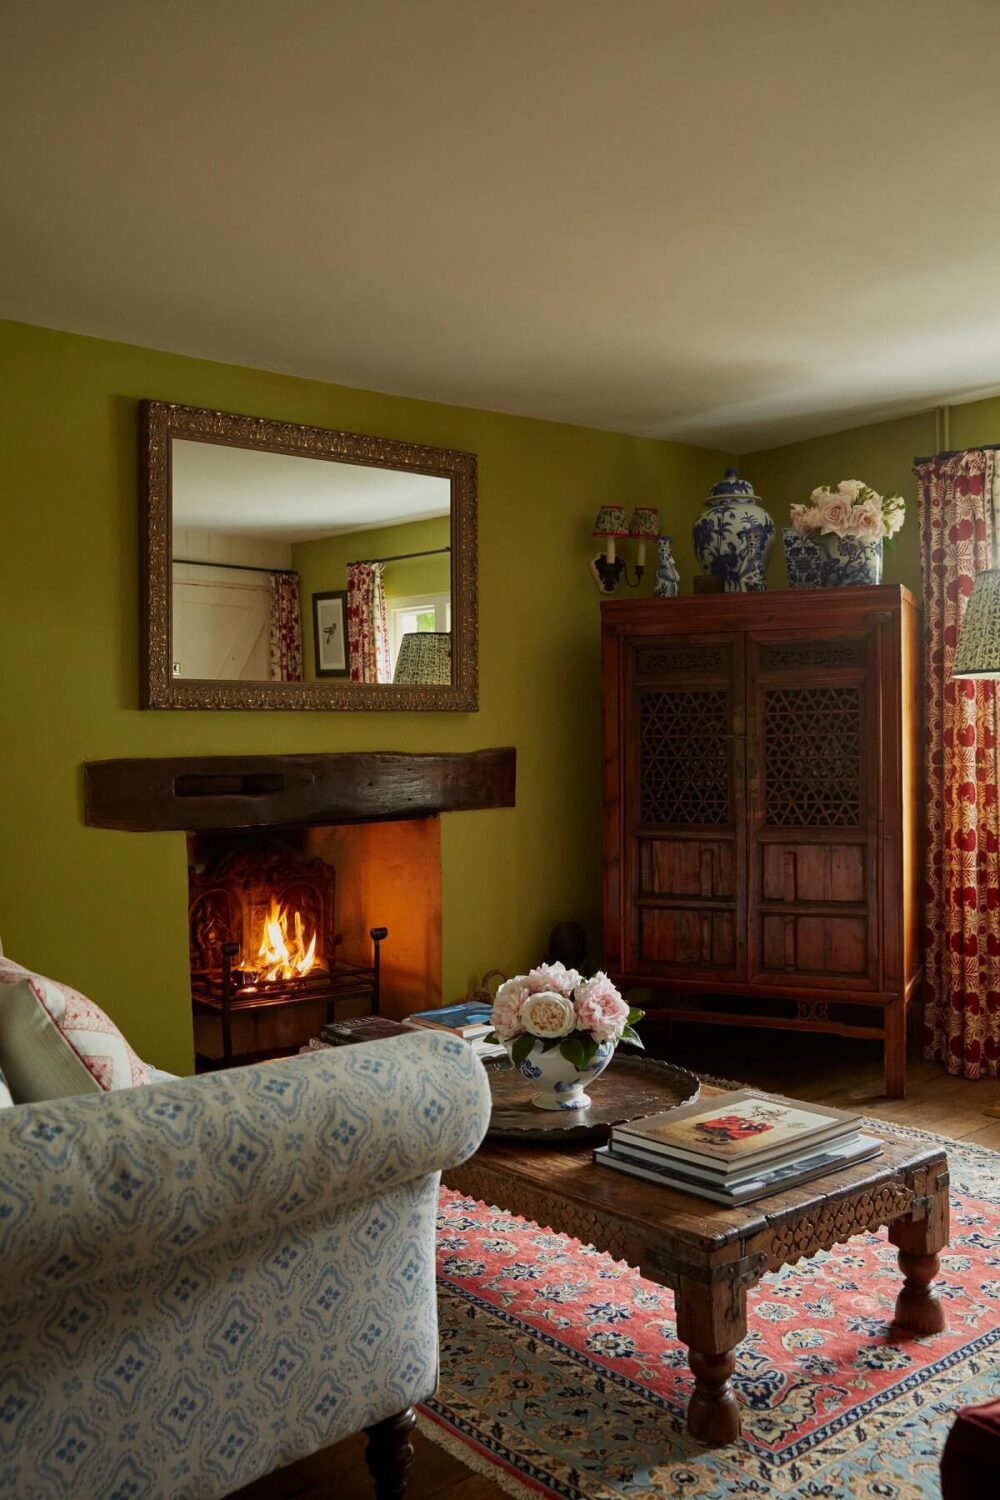 cottage-sitting-room-antique-furnishings-green-walls-fireplace-nordroom